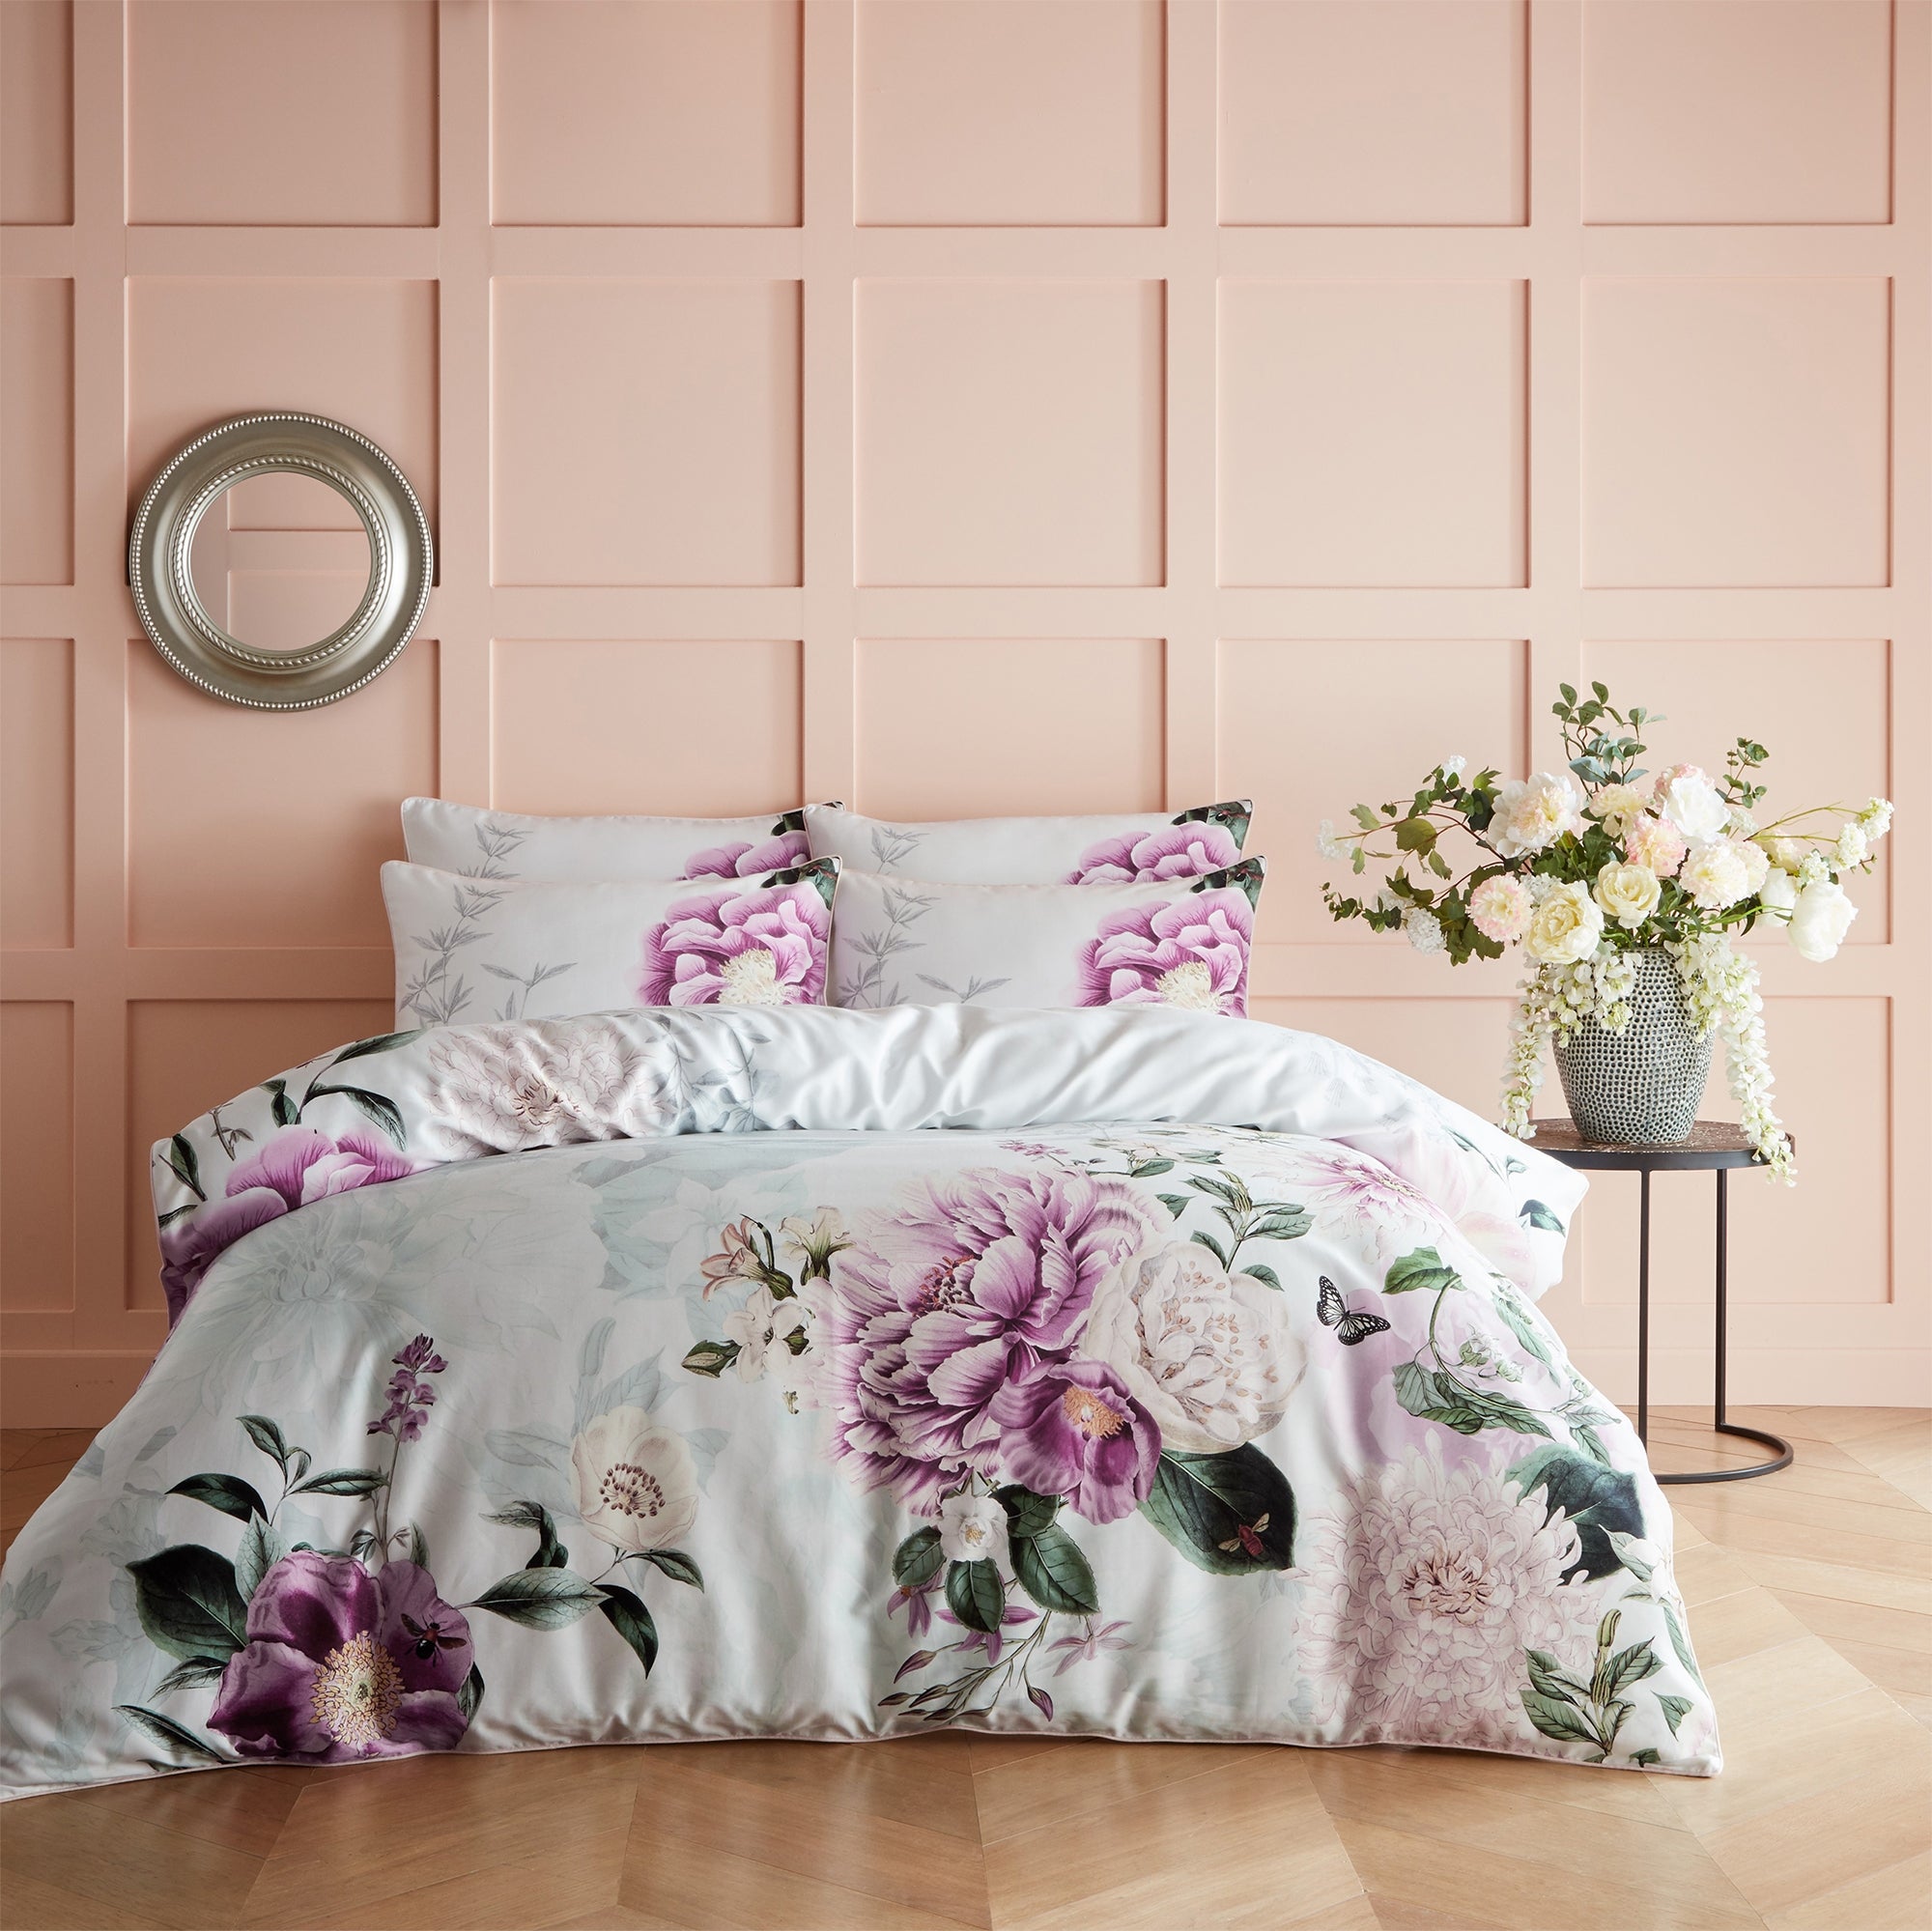 Paoletti Krista 100% Cotton Duvet Cover and Pillowcase Set Pink